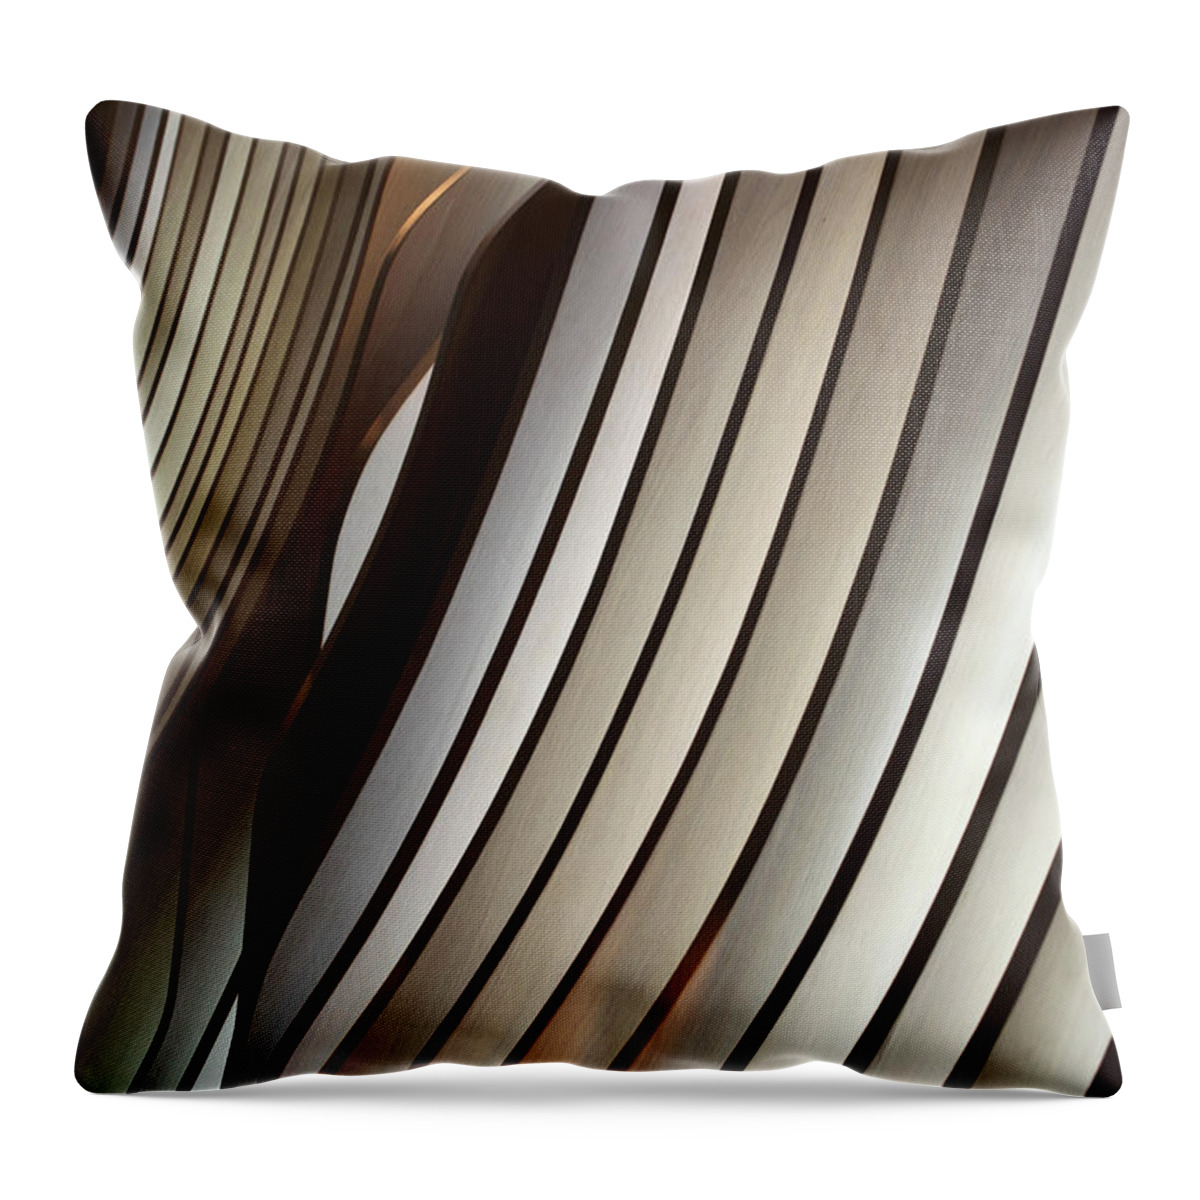 Curve Throw Pillow featuring the photograph Wavy Wooden Interior Decoration by Blackred